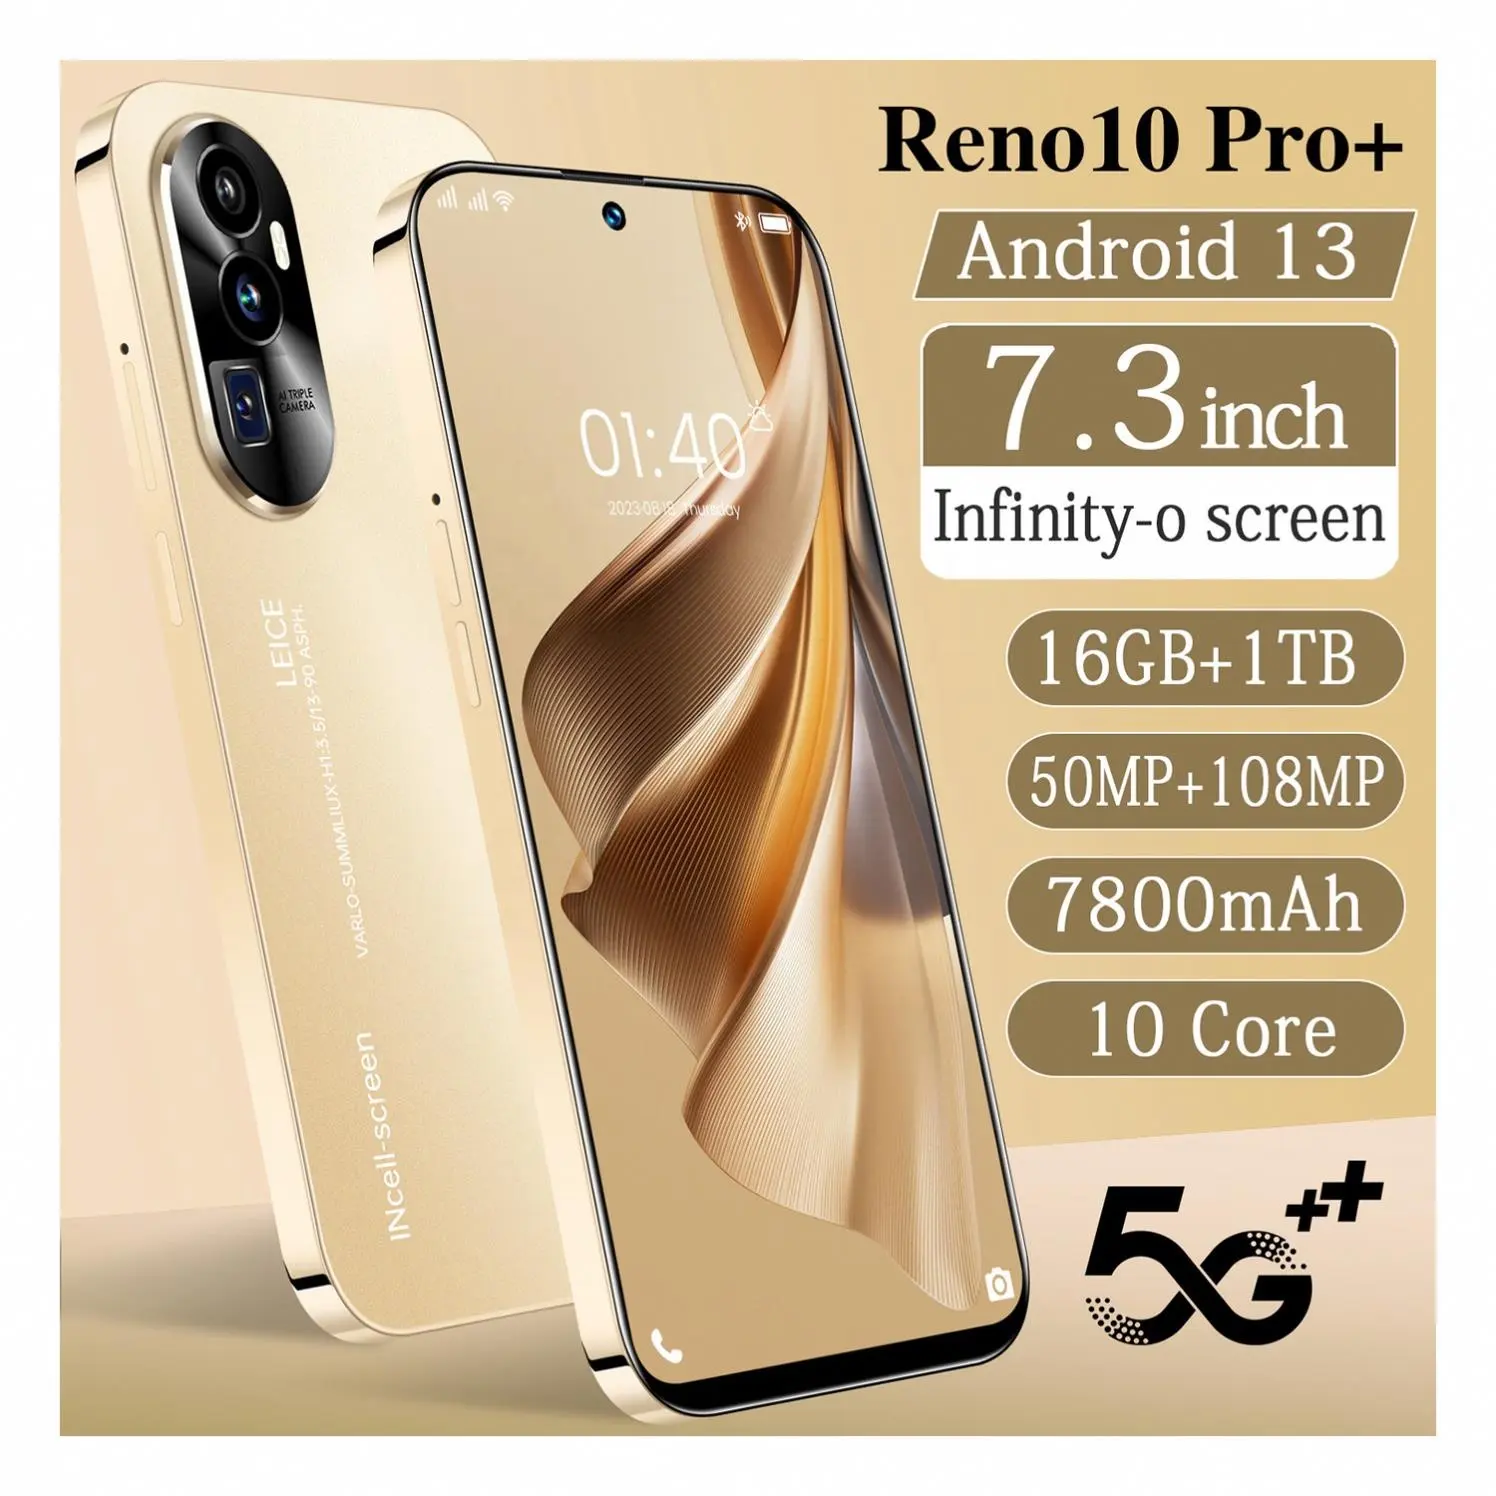 Hot Selling Reno10 Pro+ Smartphone Cheap Price Android Phone China Mobile Phones 7.3inch 16GB+1TB 7800mAh 50MP+108MP Phone